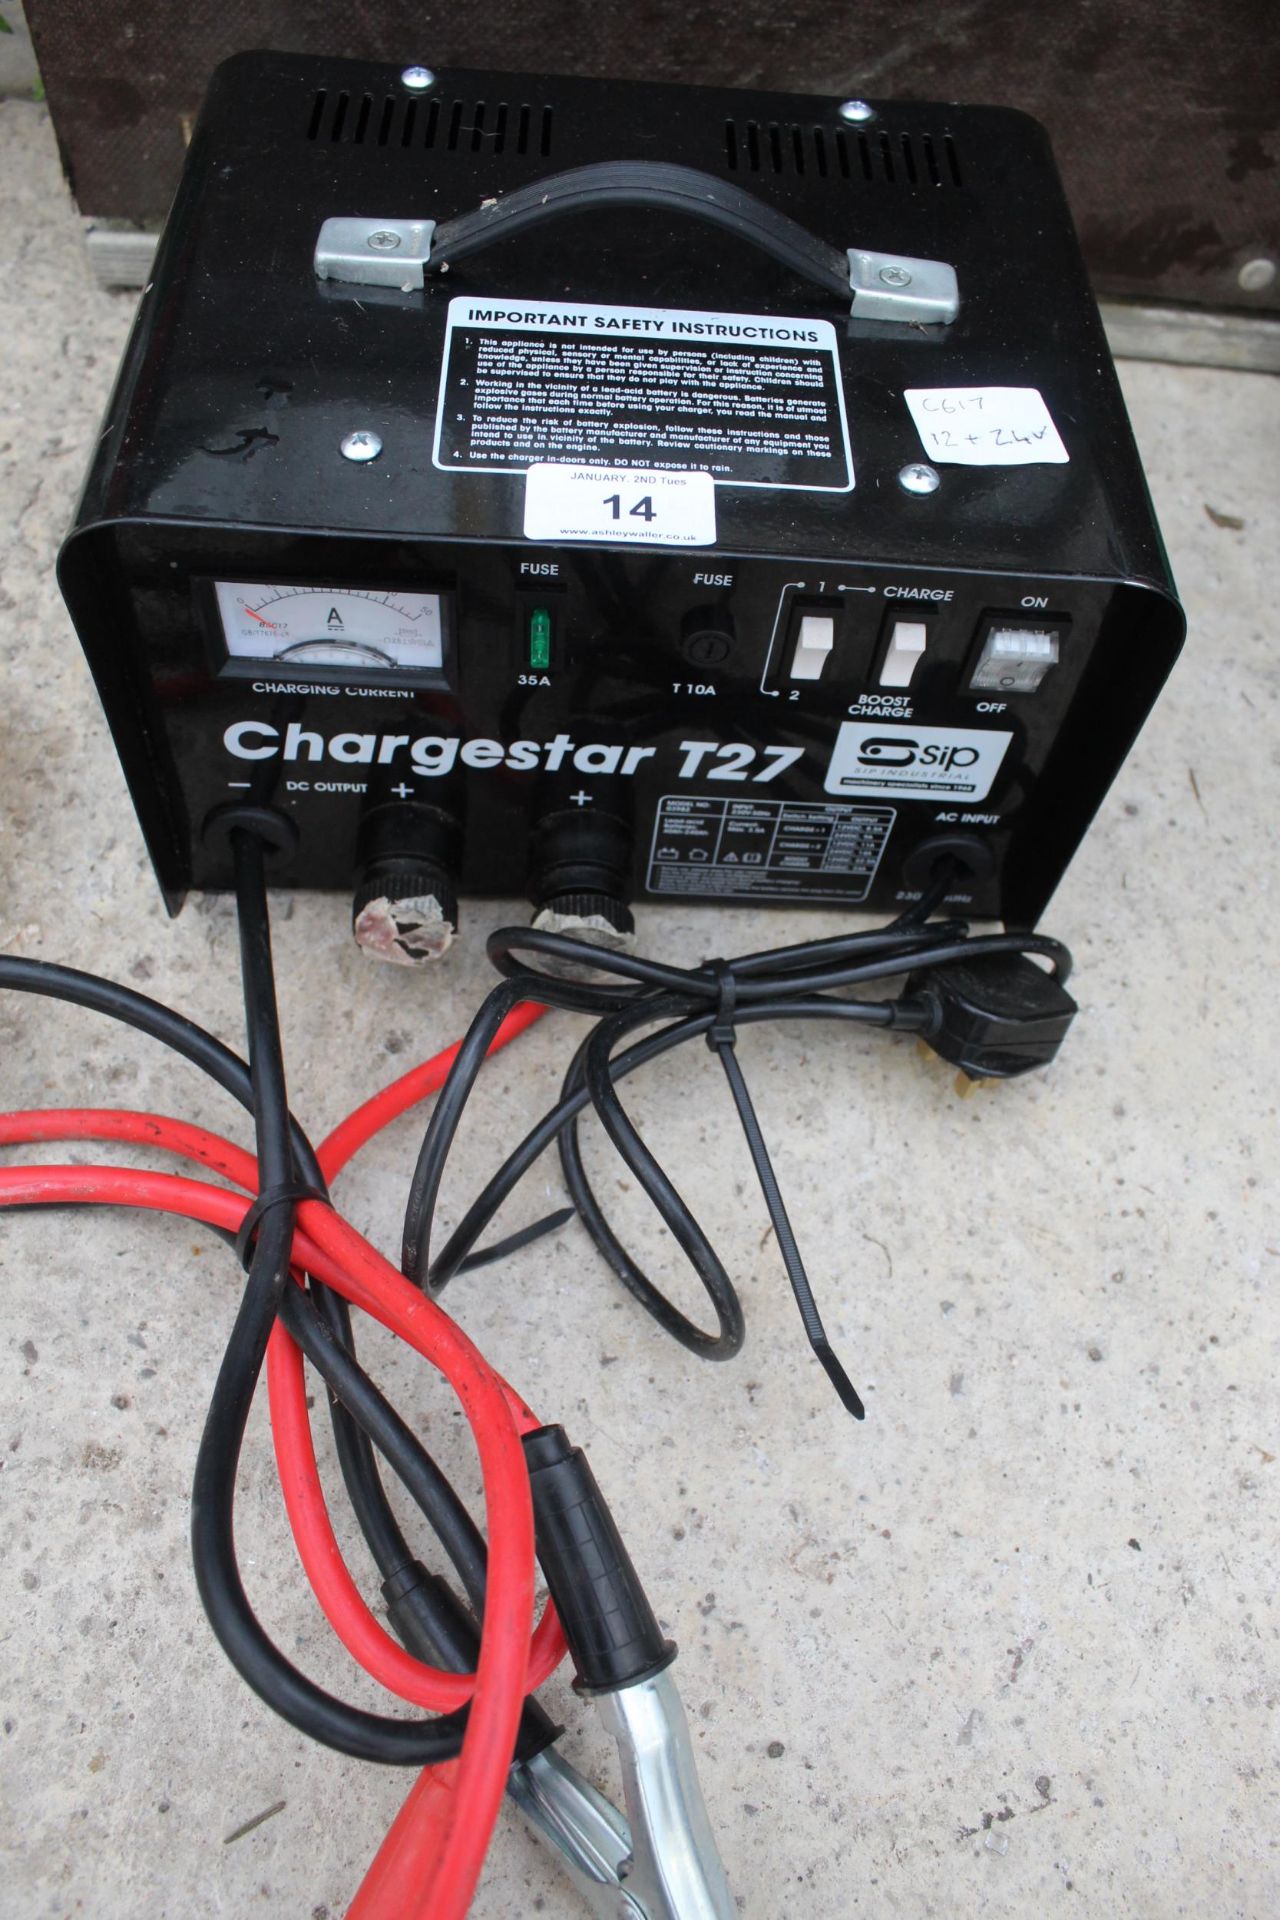 A CHARGESTAR 12+24V BATTERY CHARGER NO VAT